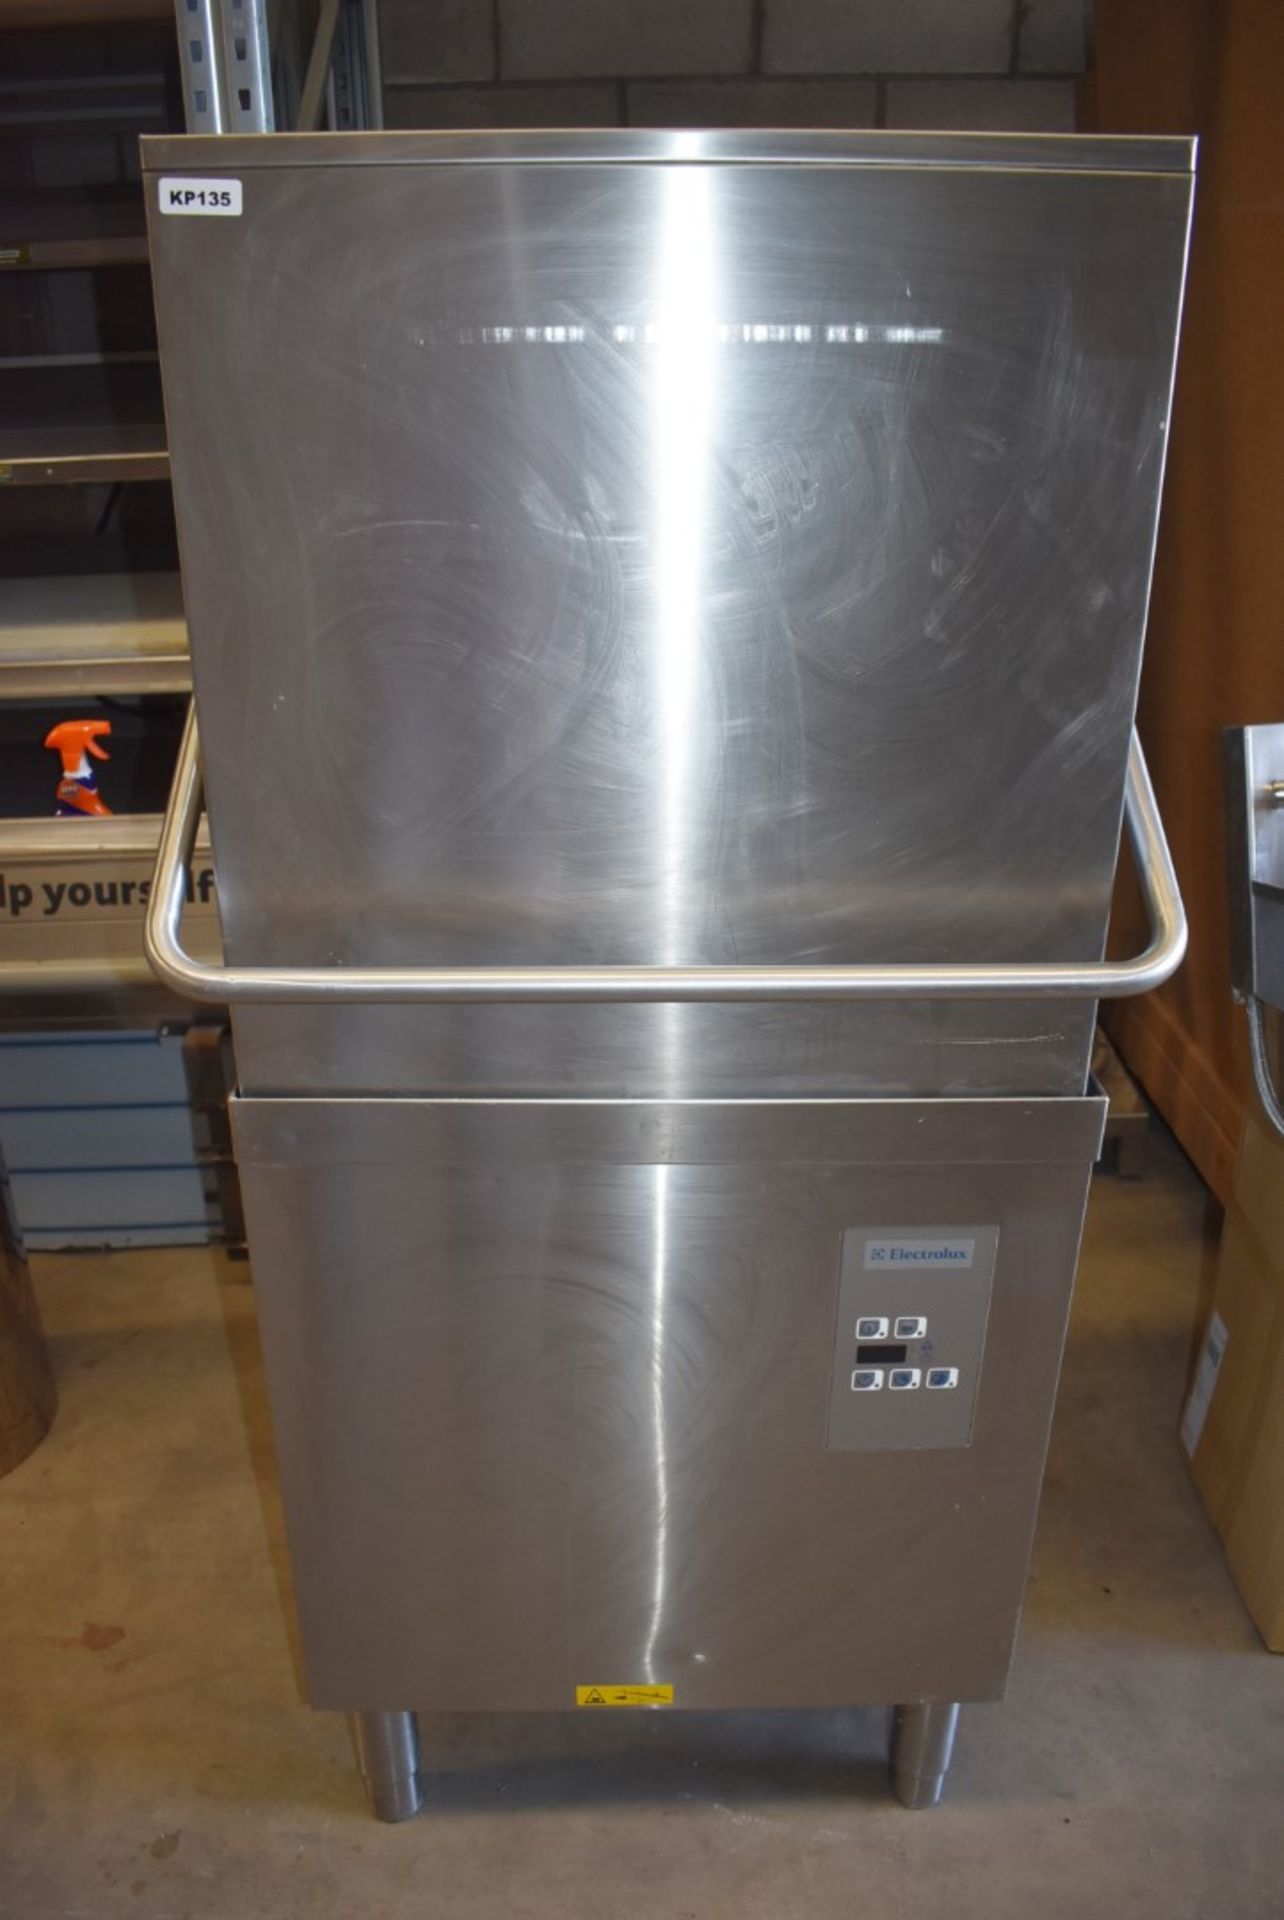 1 x Electrolux Commercial Passthrough Dishwasher With Stainless Steel Finish - Model NHTG - 3 - Image 3 of 10